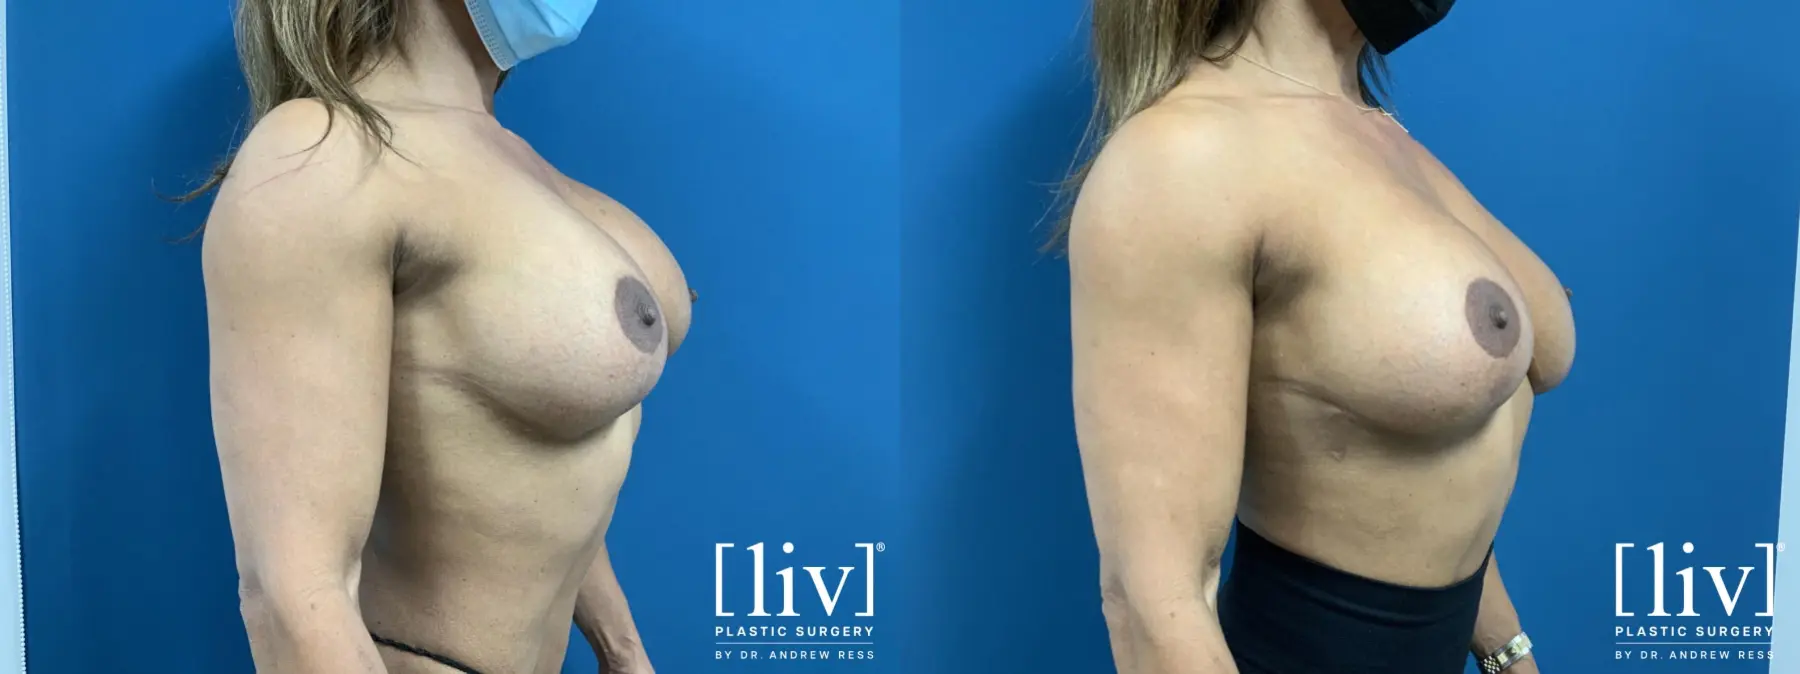 Breast Implant Exchange and Capsulectomy - Before and After 4